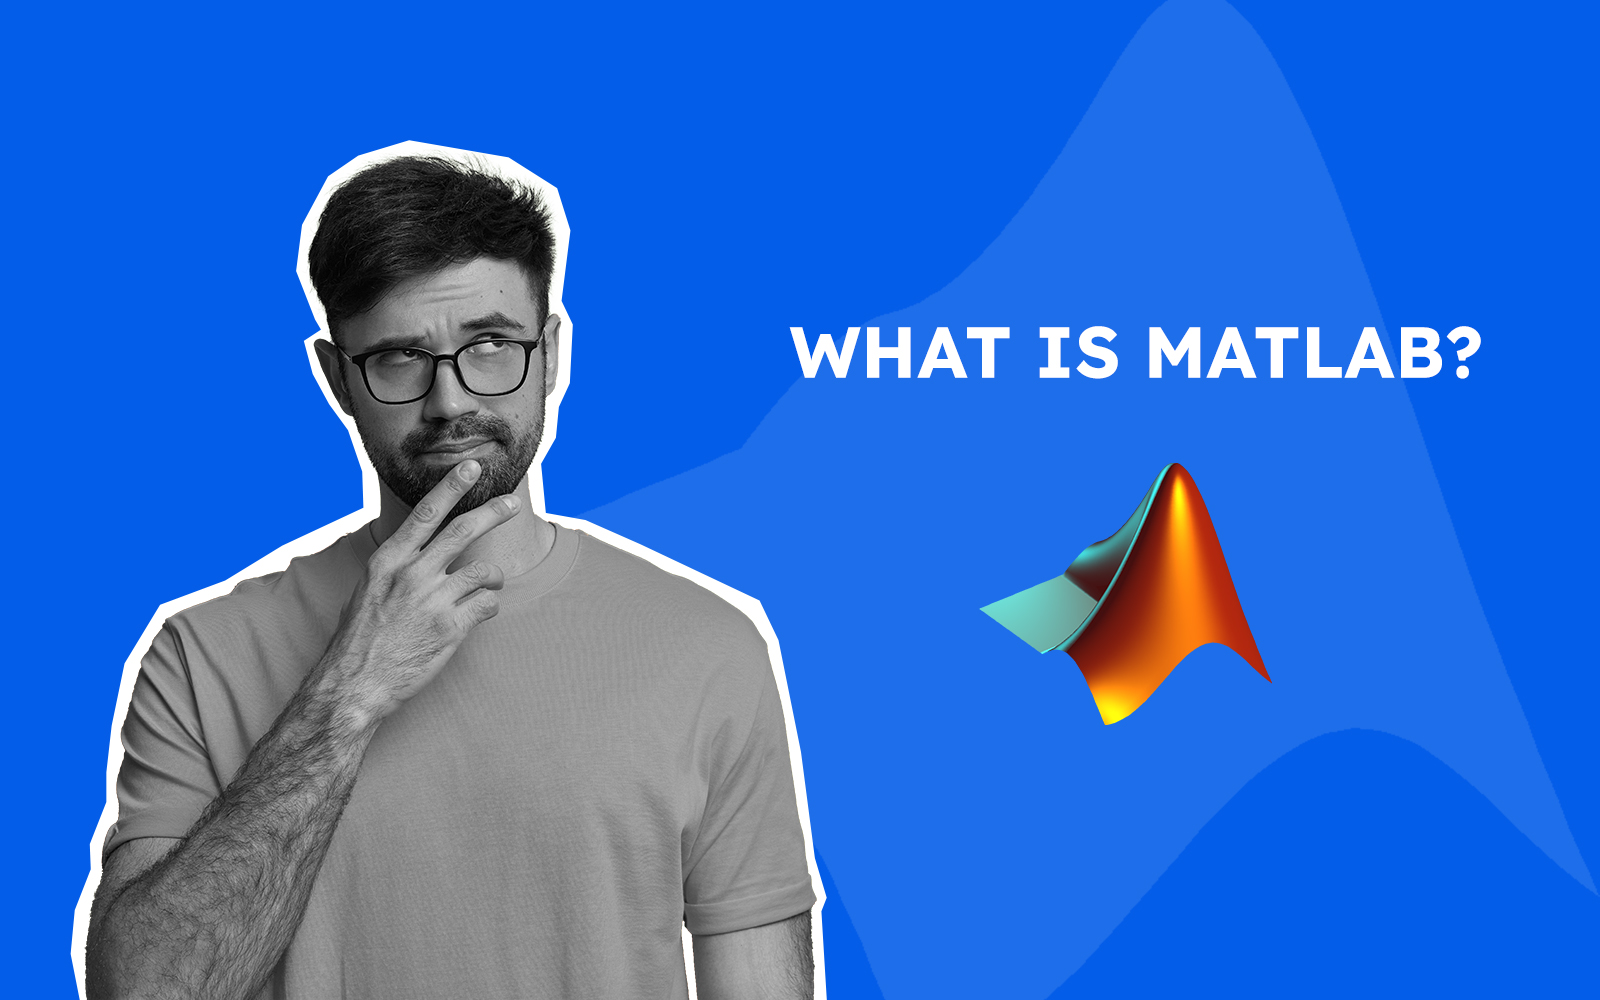 What is Matlab